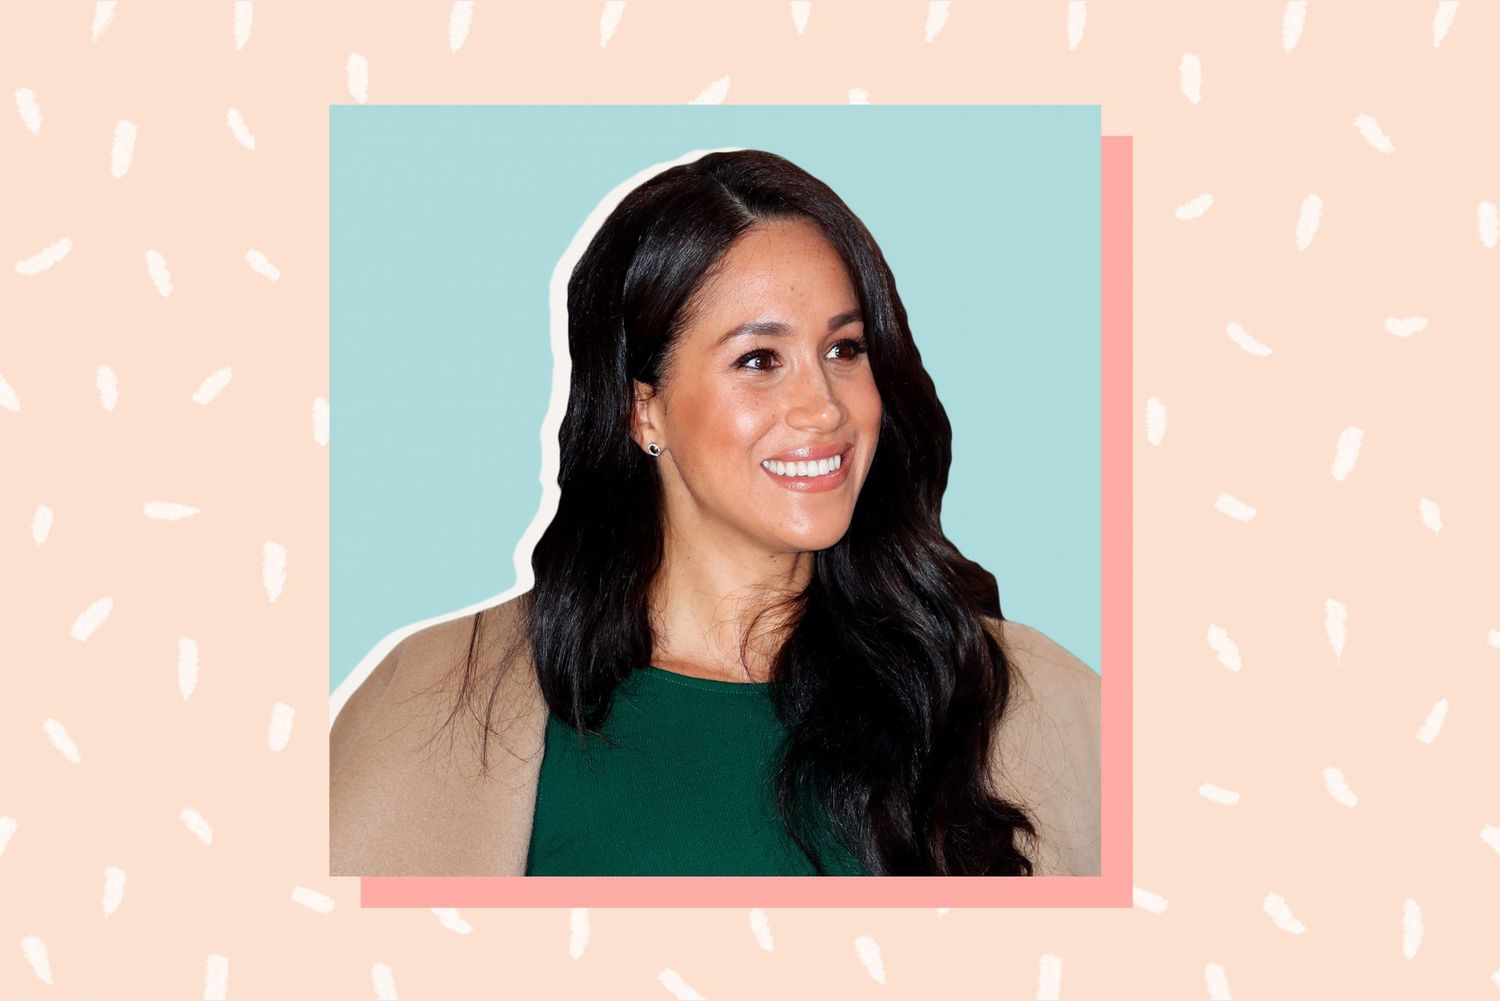 An image of Meghan Markle on a colorful background.